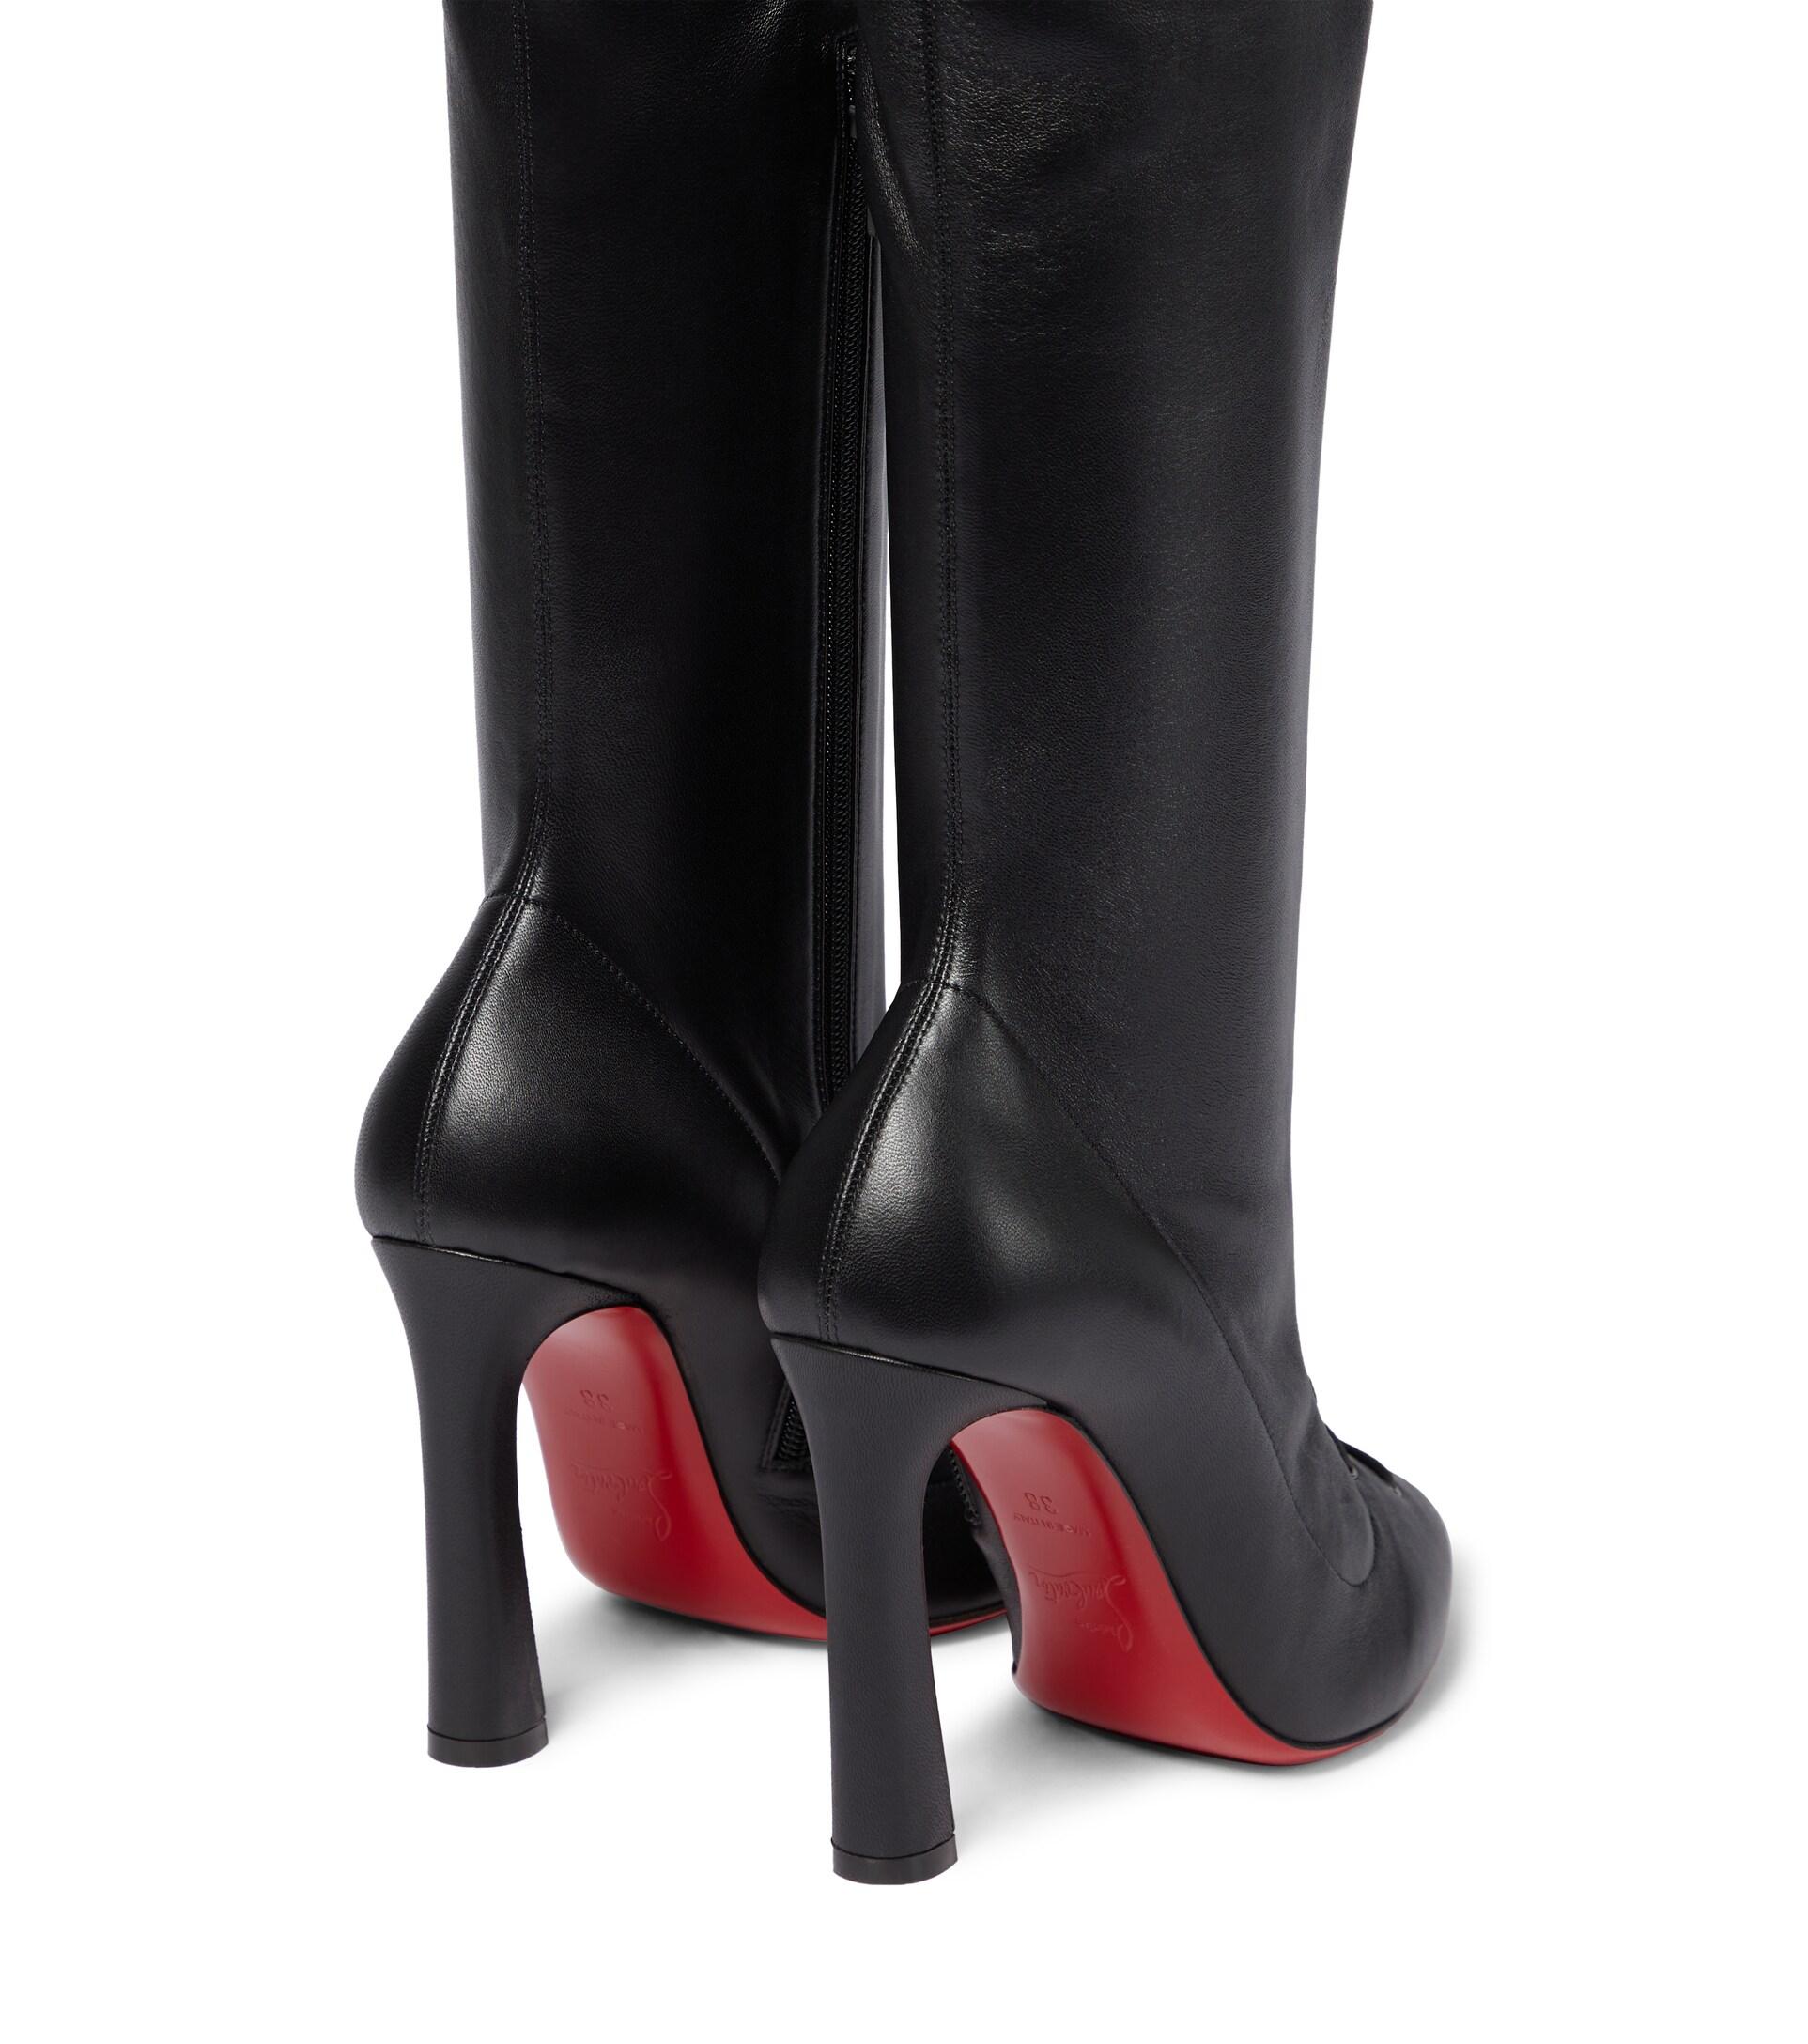 Christian Louboutin Anjel 100 Leather Boots in Black